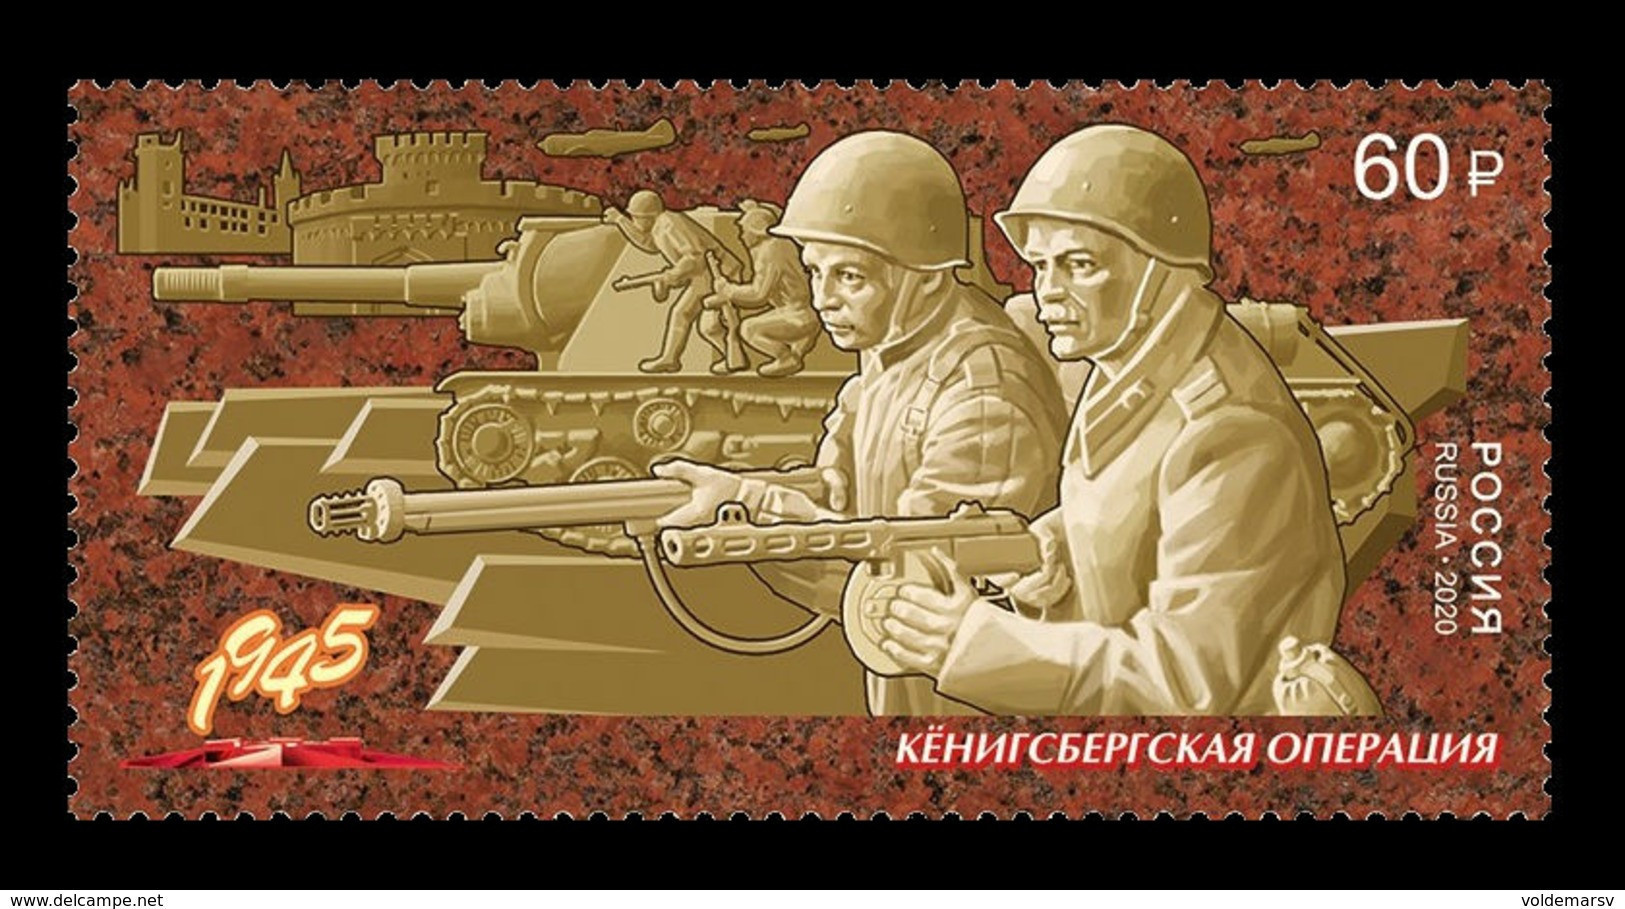 Russia 2020 Mih. 2847 World War II. Way To The Victory. Battle Of Konigsberg MNH ** - Unused Stamps